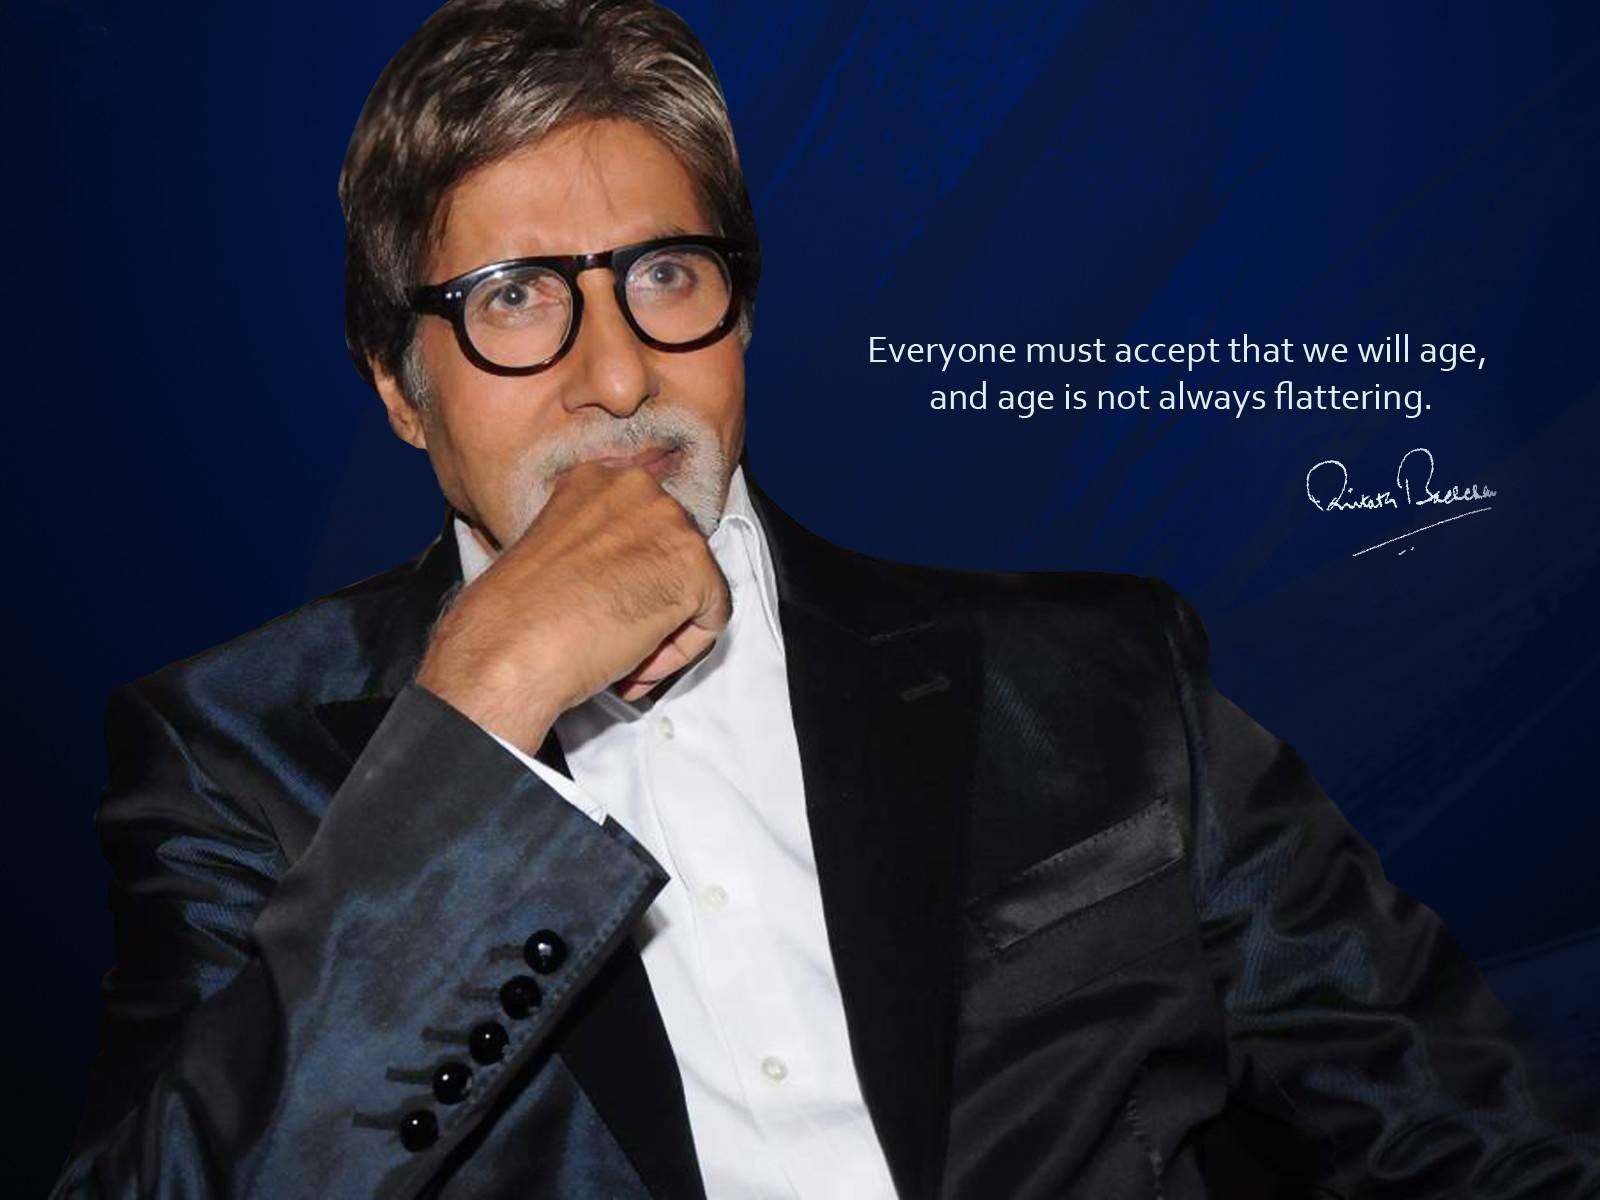 Click Here To Download In HD Format >> Amitabh Bachchan Wallpaper Amita. Beautiful Quotes, Amitabh Bachchan Quotes, Wallpaper Quotes